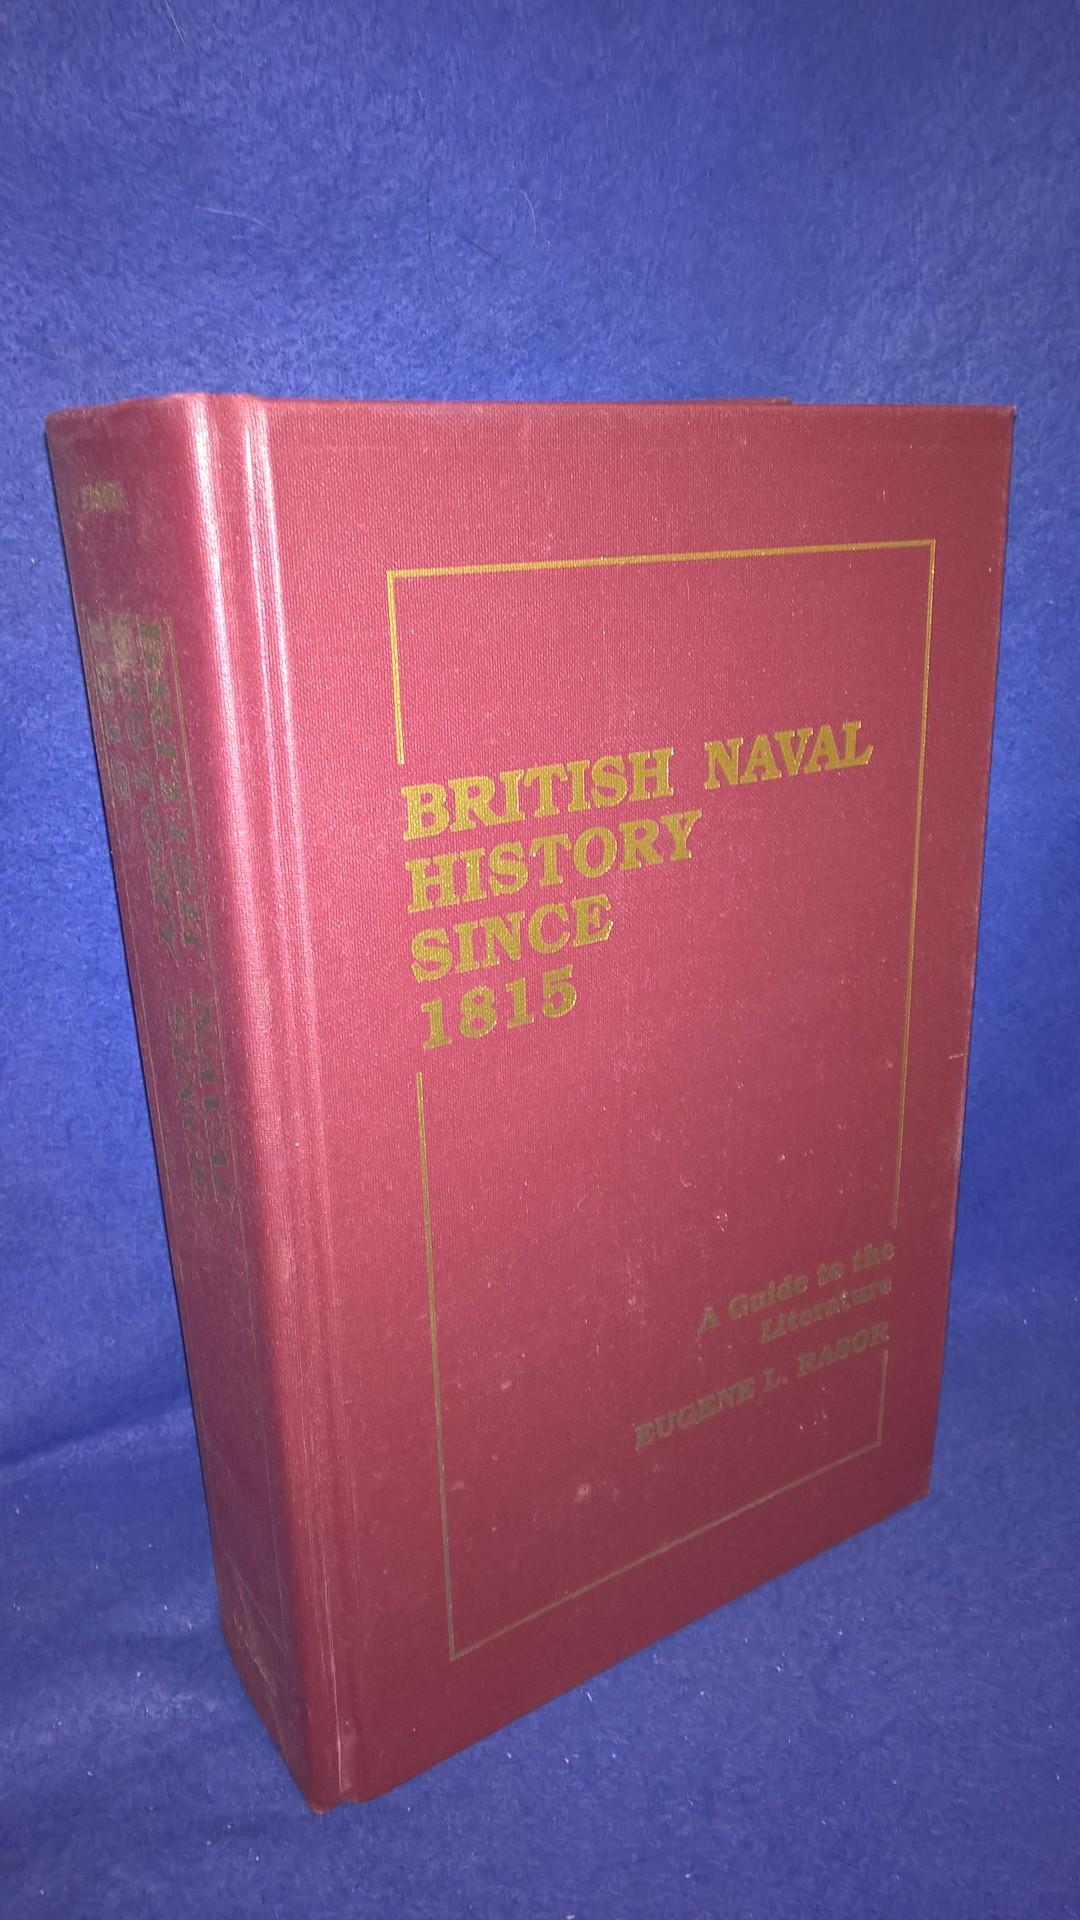 British Naval History Since 1815. A Giude to the Literature.